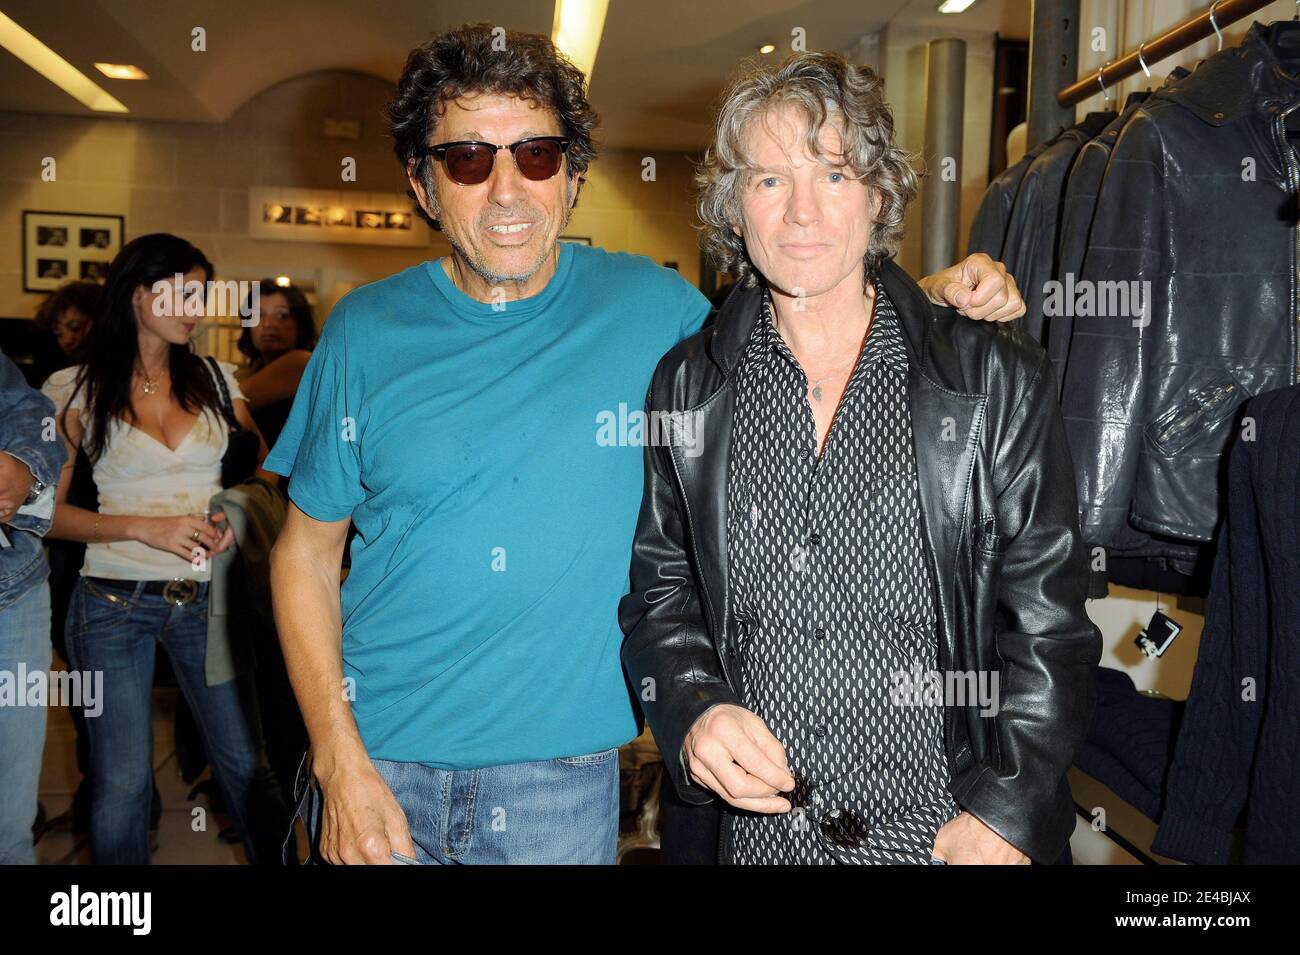 Paul Personne with Tony Frank attending the 'Serge Gainsbourg' Exhibition  by Tony Frank held at the Renoma store in Paris, France on September 10,  2009. Photo by Thierry Orban/ABACAPRESS.COM Stock Photo -